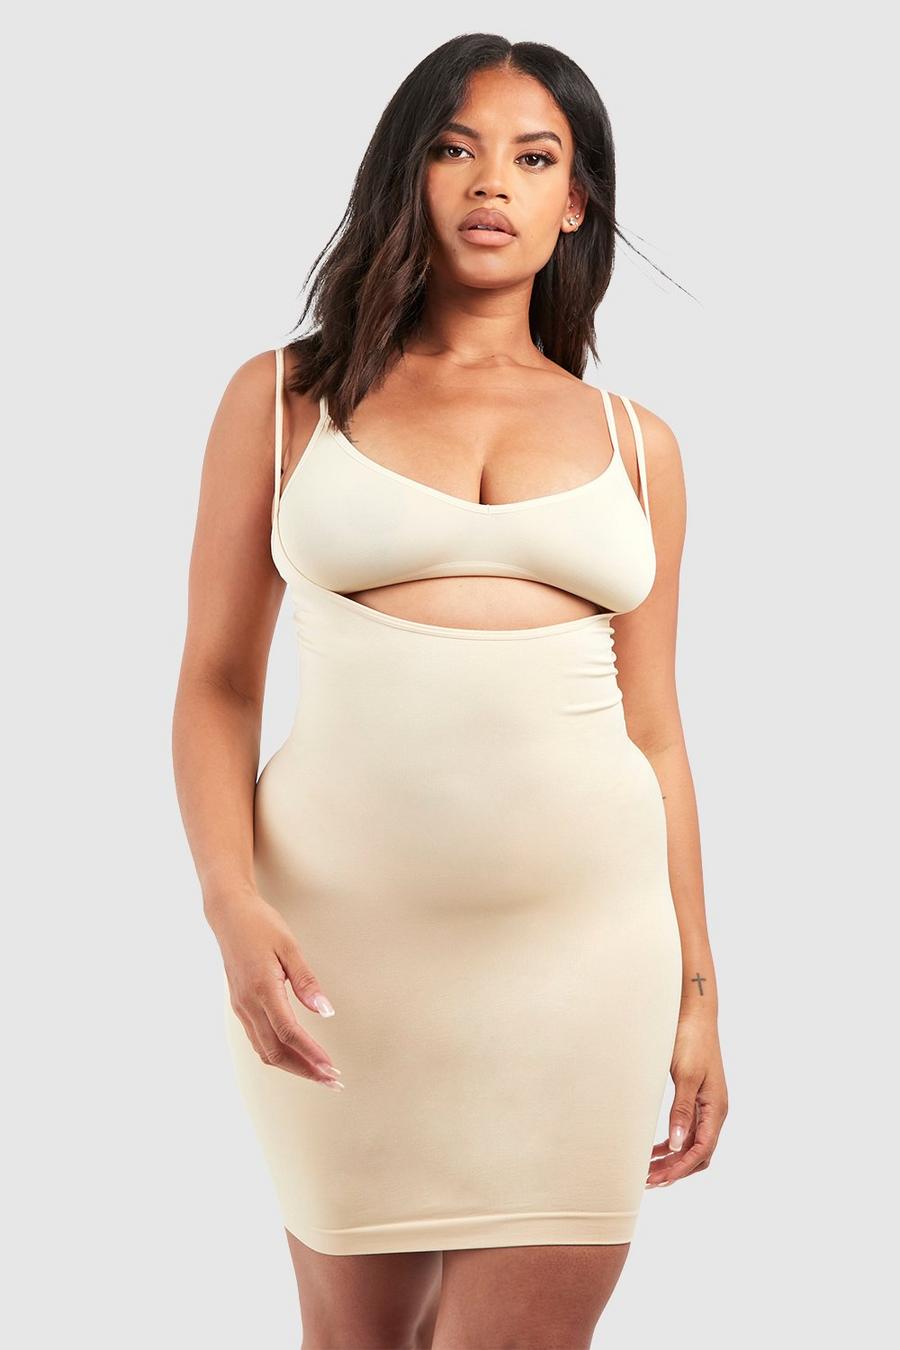 Boohoo Plus Seamless Control Shaping Under Bust Dress in Natural